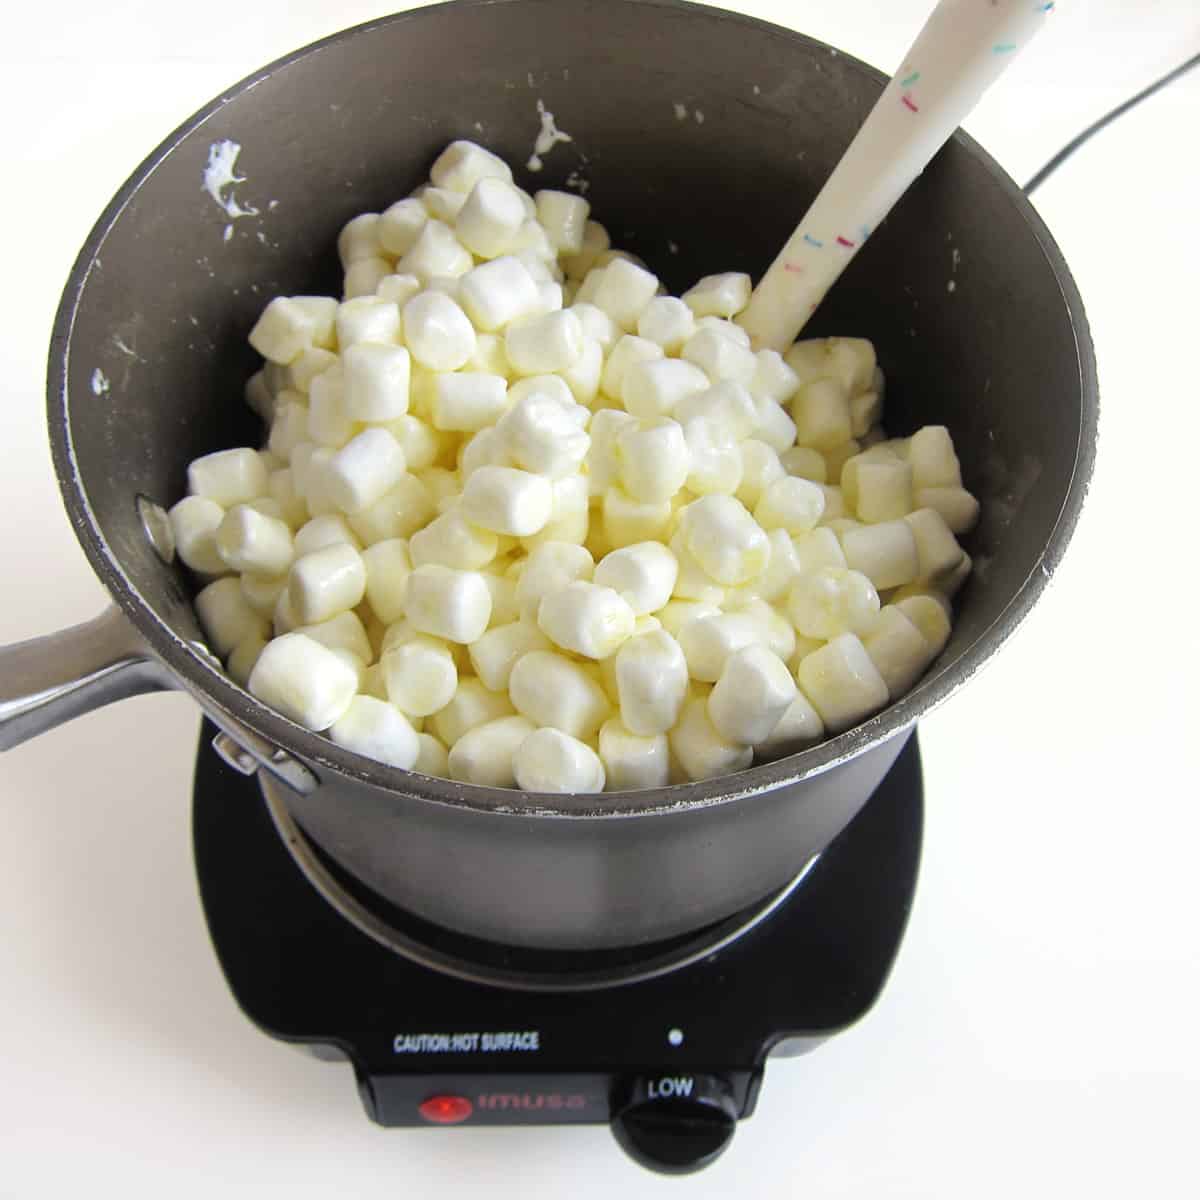 mix marshmallows into melted butter in saucepan